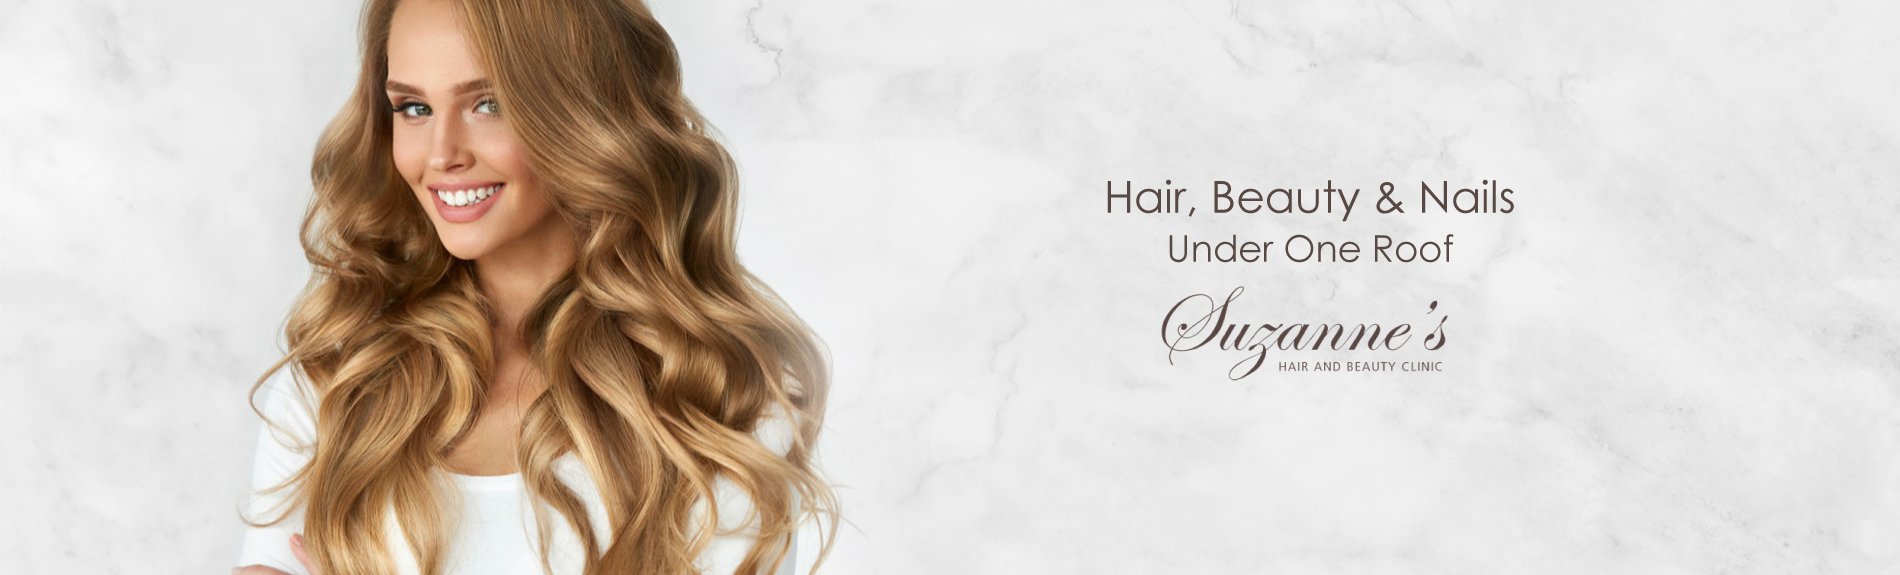 Hair, Beauty & Nails Under One Roof At Suzanne's Hair & Beauty Salon In Coventry